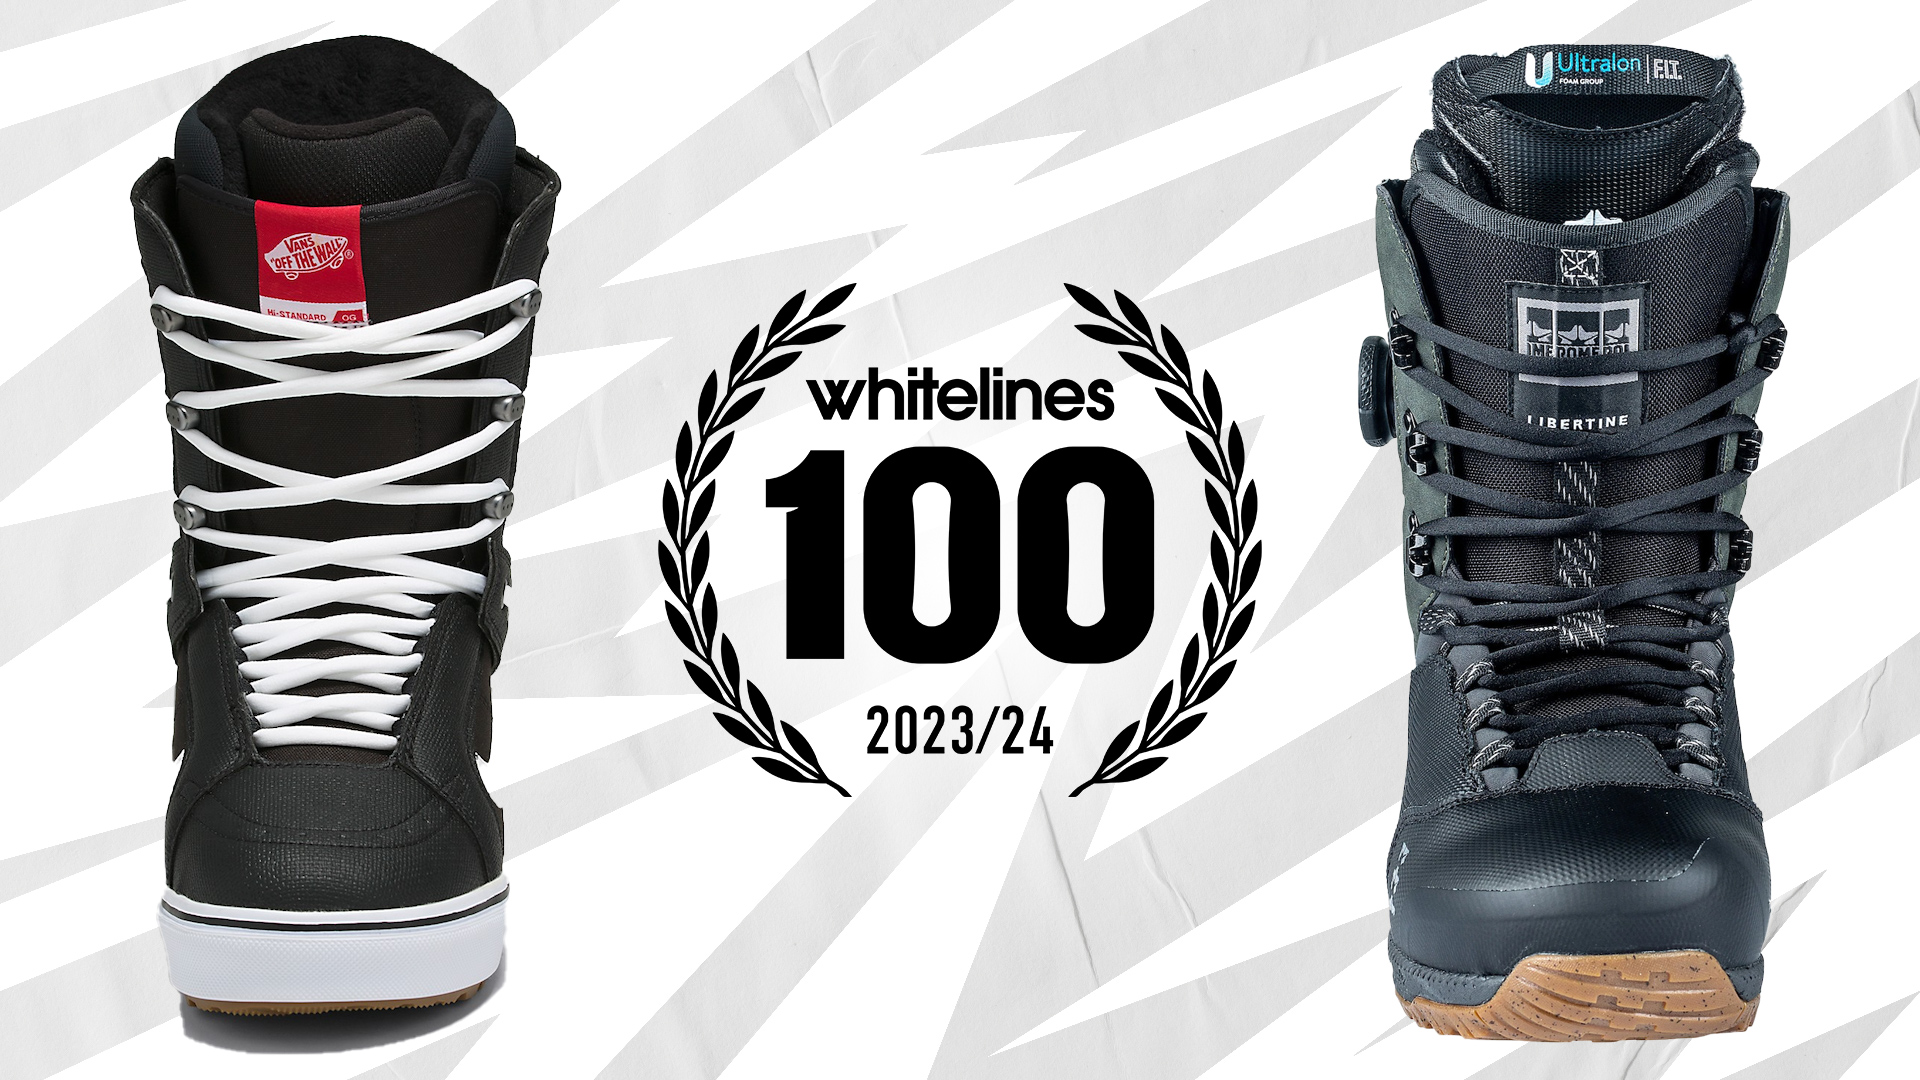 Best Snowboard Boots For 2023-2024 - Whitelines Snow